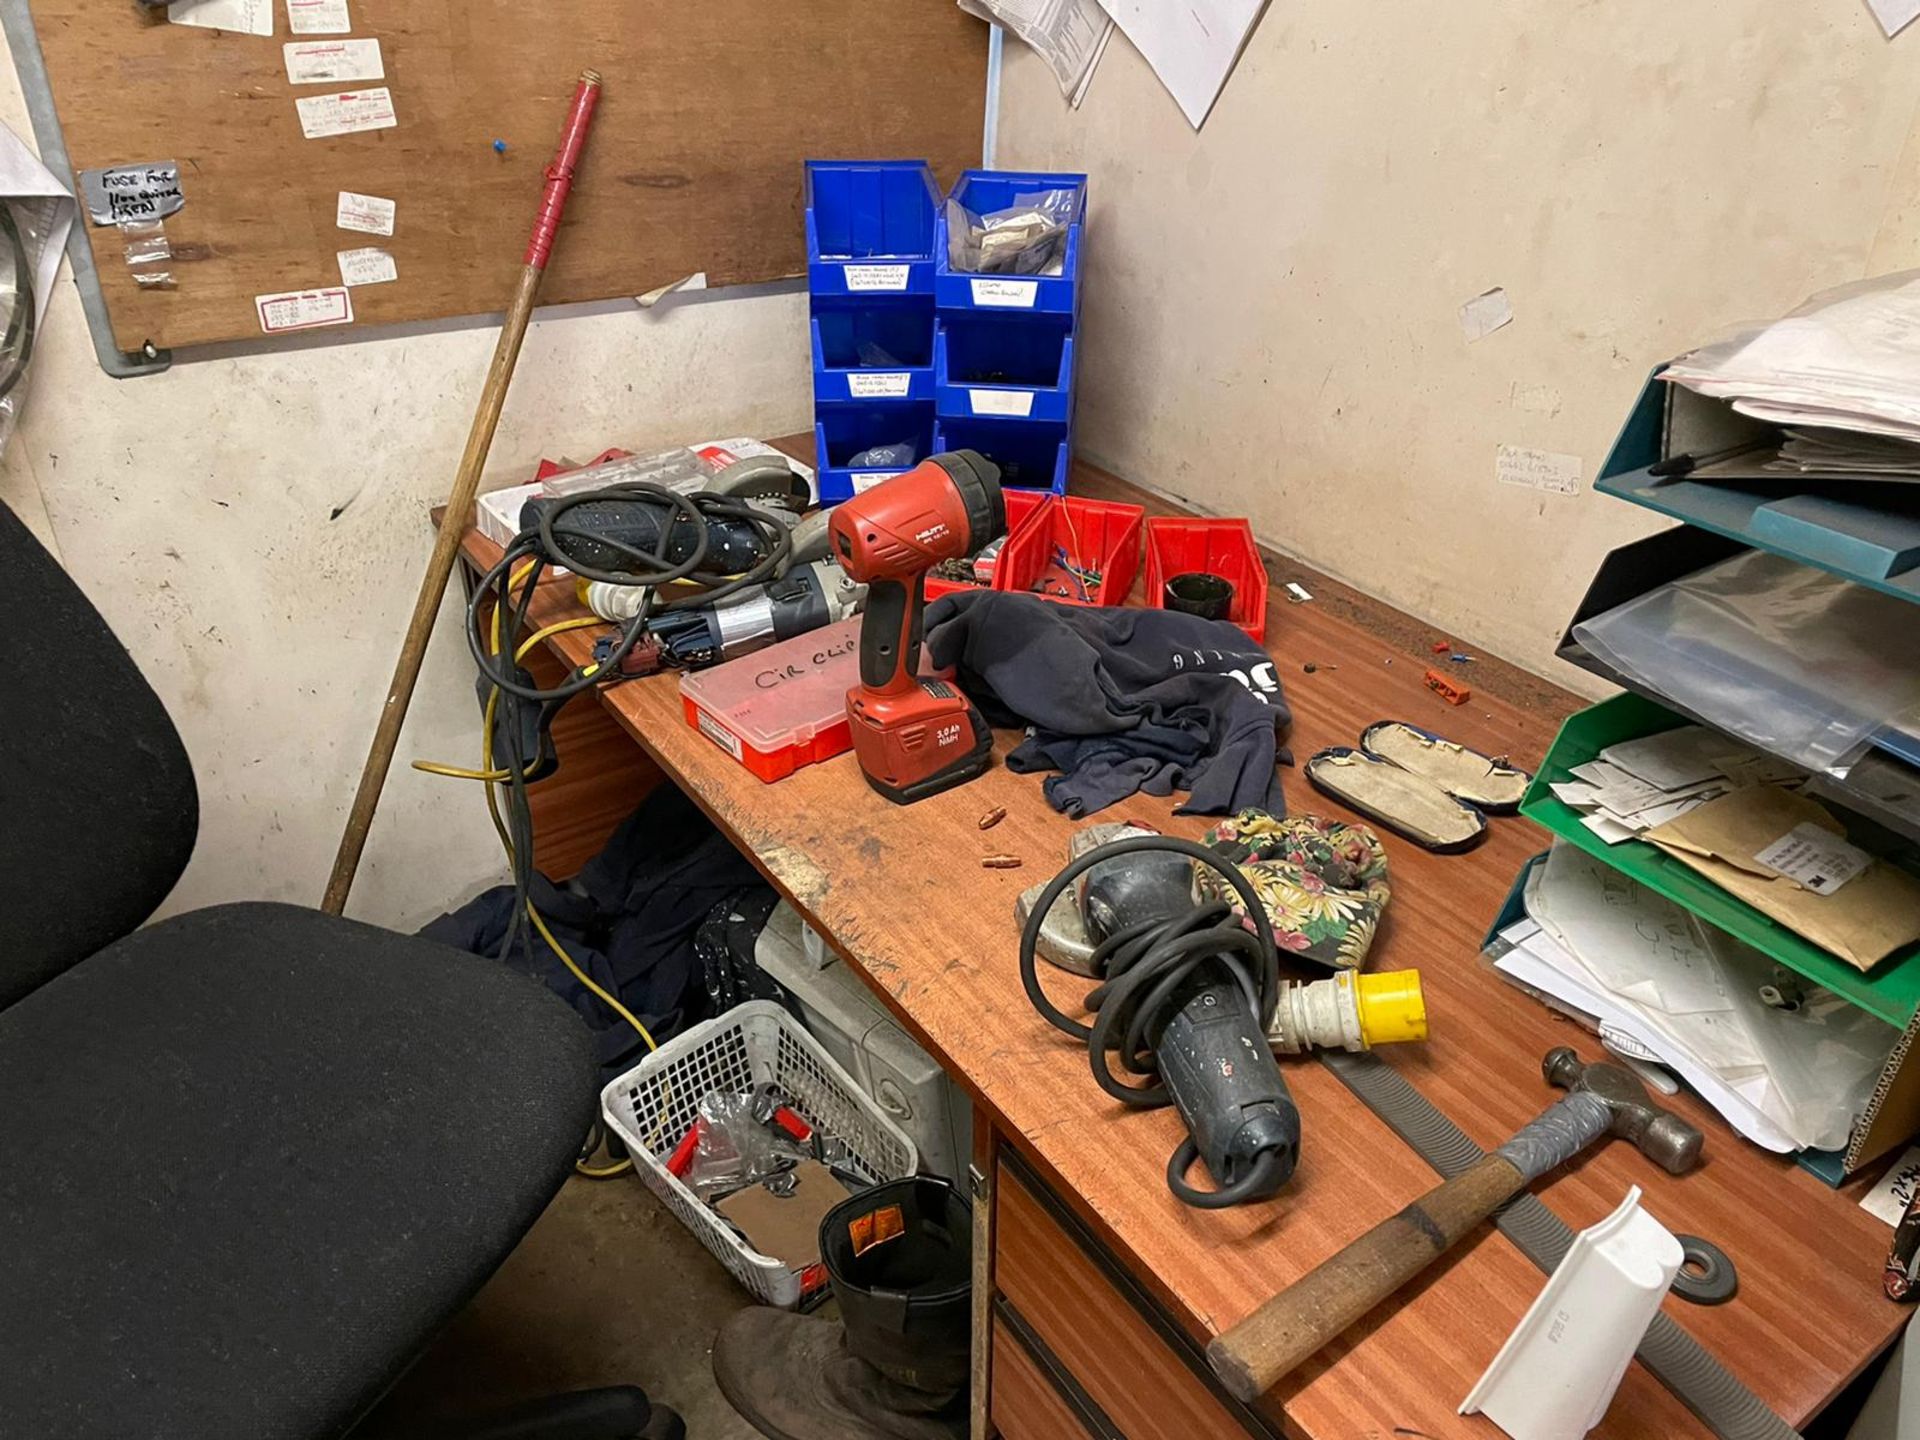 Entire Room Contents- Grinders, Hilti Drill, Rod Warmers, Circular Cutters & more. - Image 2 of 7